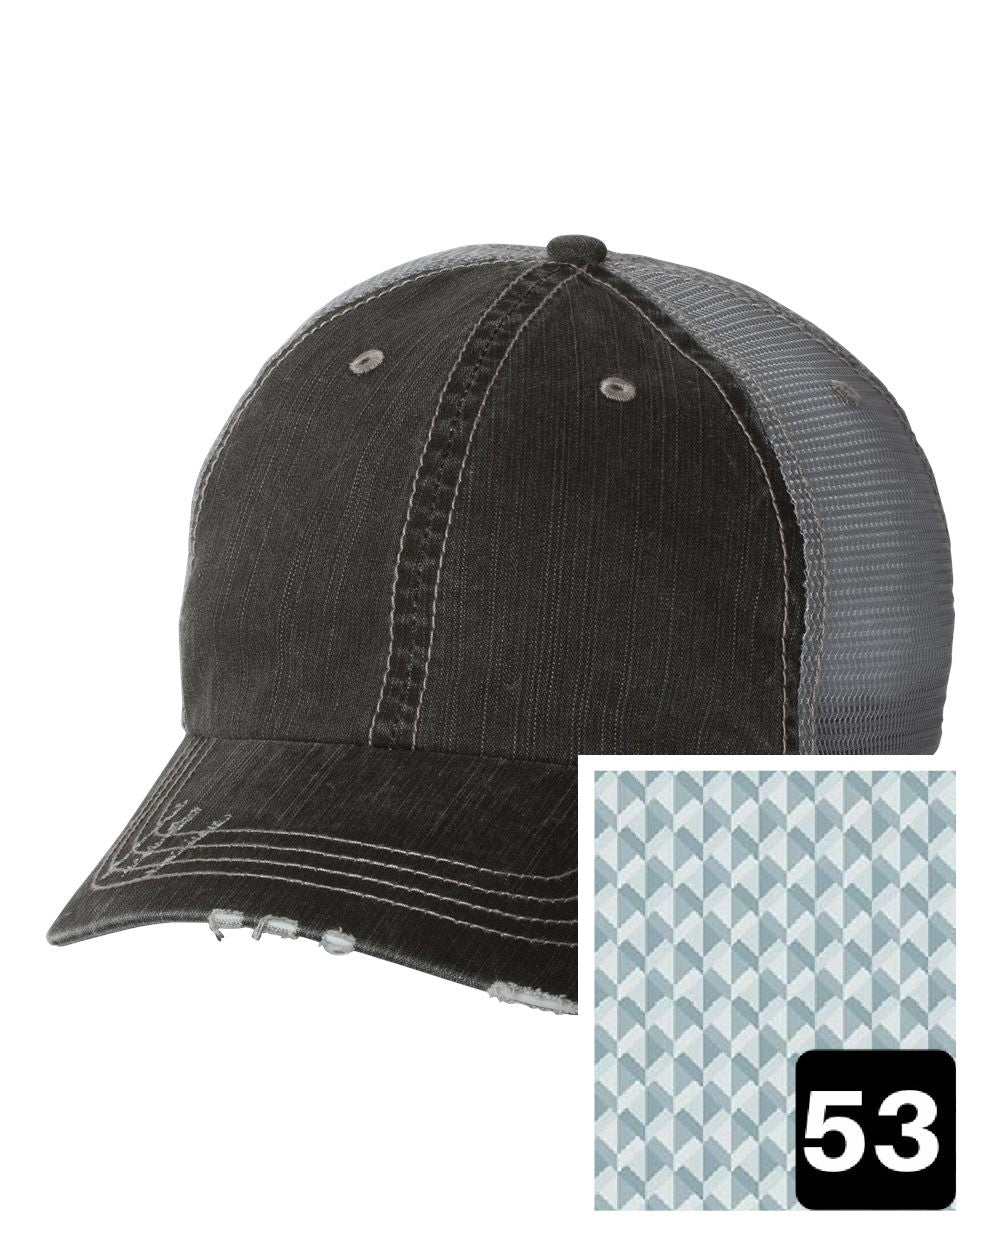 gray distressed trucker hat with multi-color stripe fabric state of Delaware